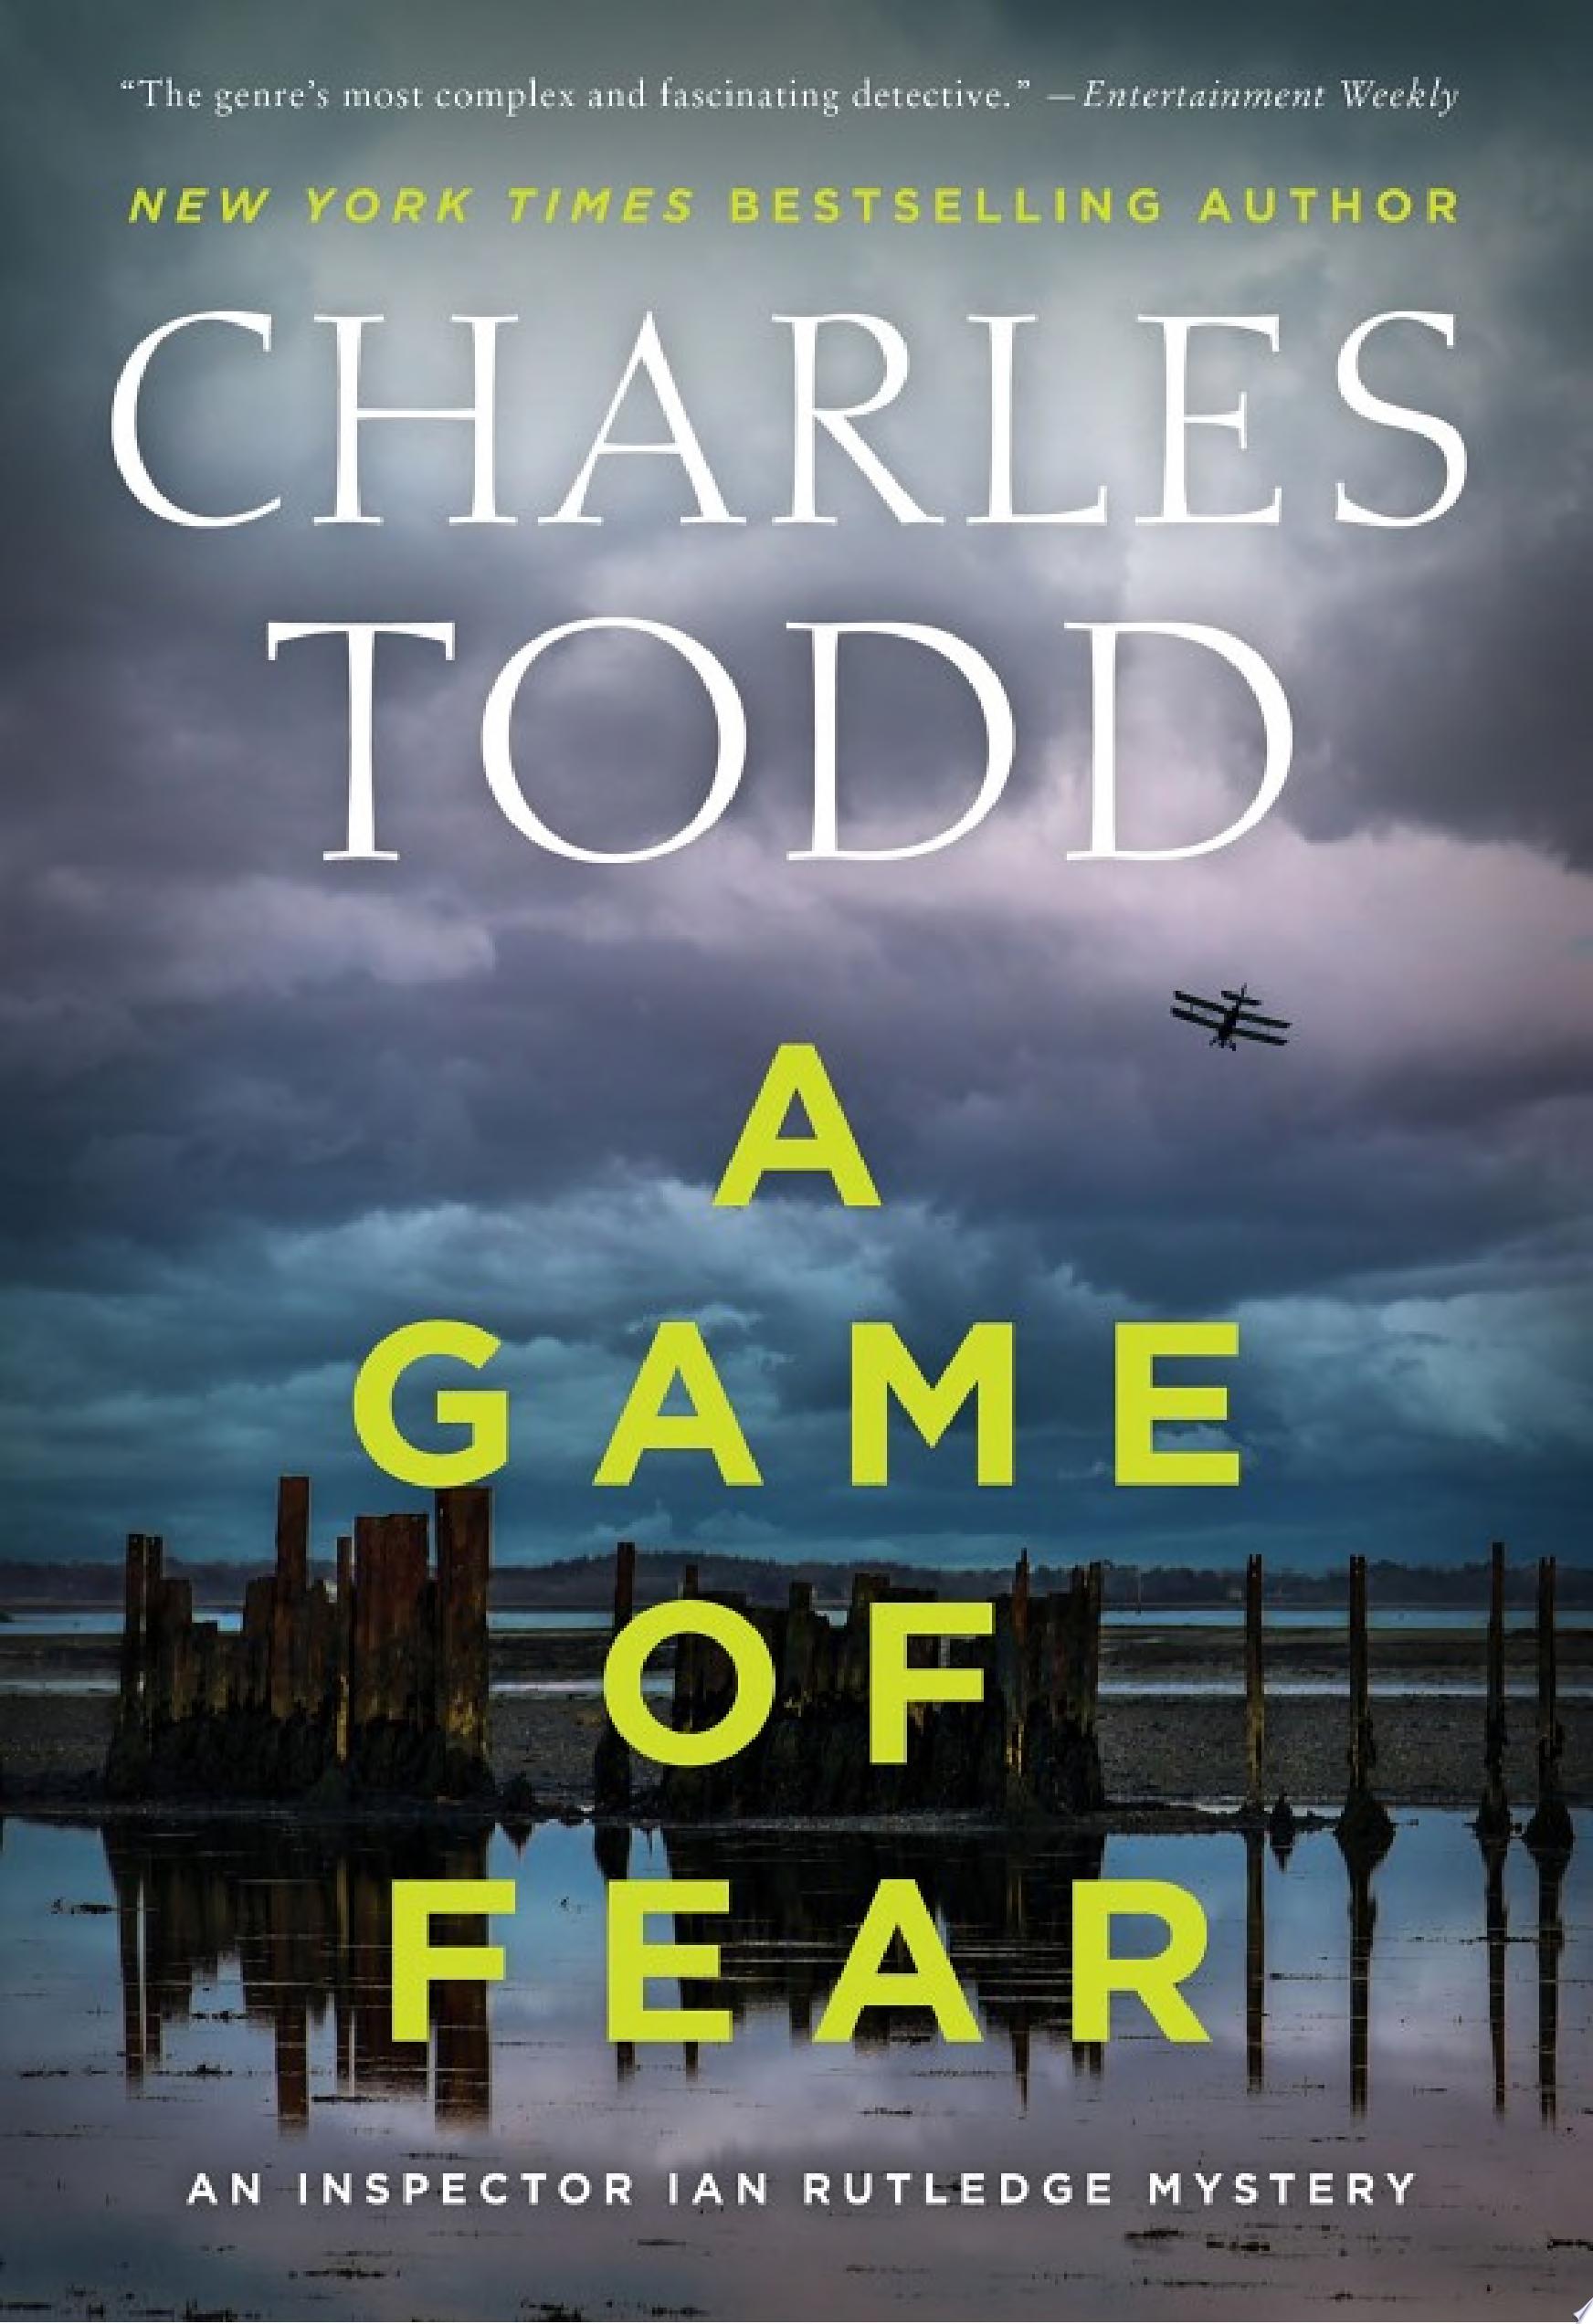 Image for "A Game of Fear"